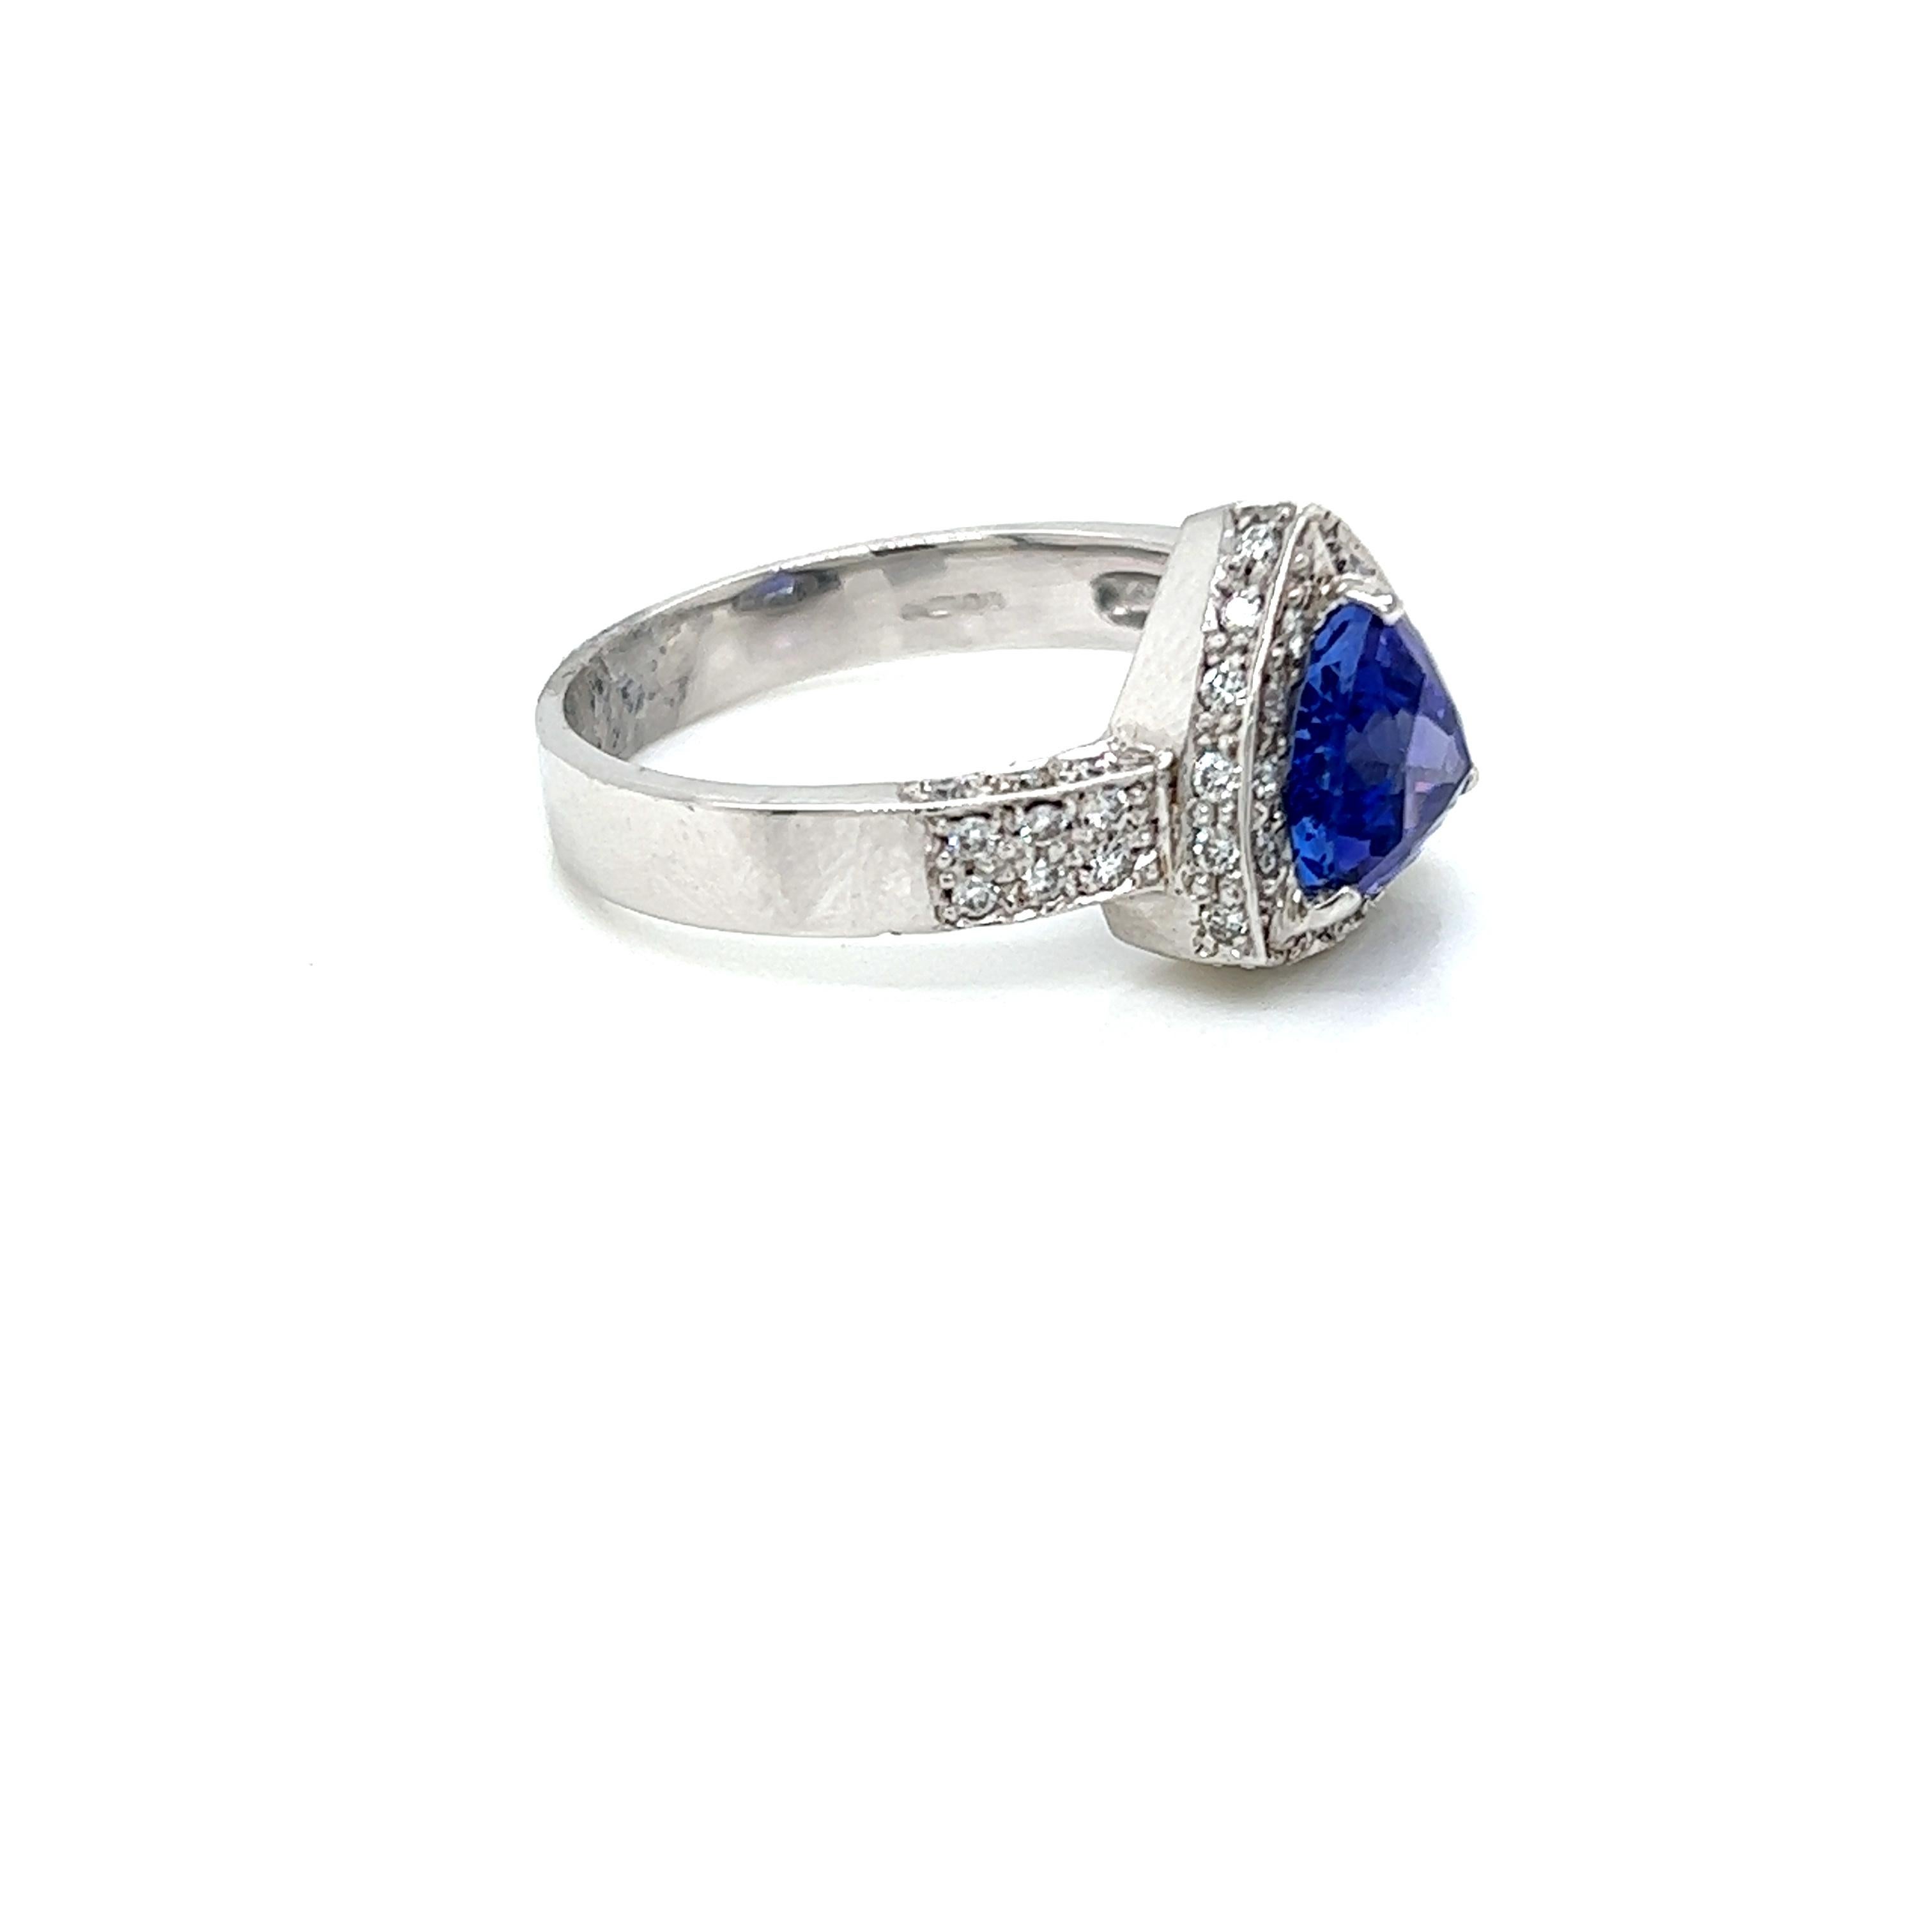 2.1 Carat Trillion cut Tanzanite and Diamond Ring in 18K White Gold In New Condition For Sale In London, GB